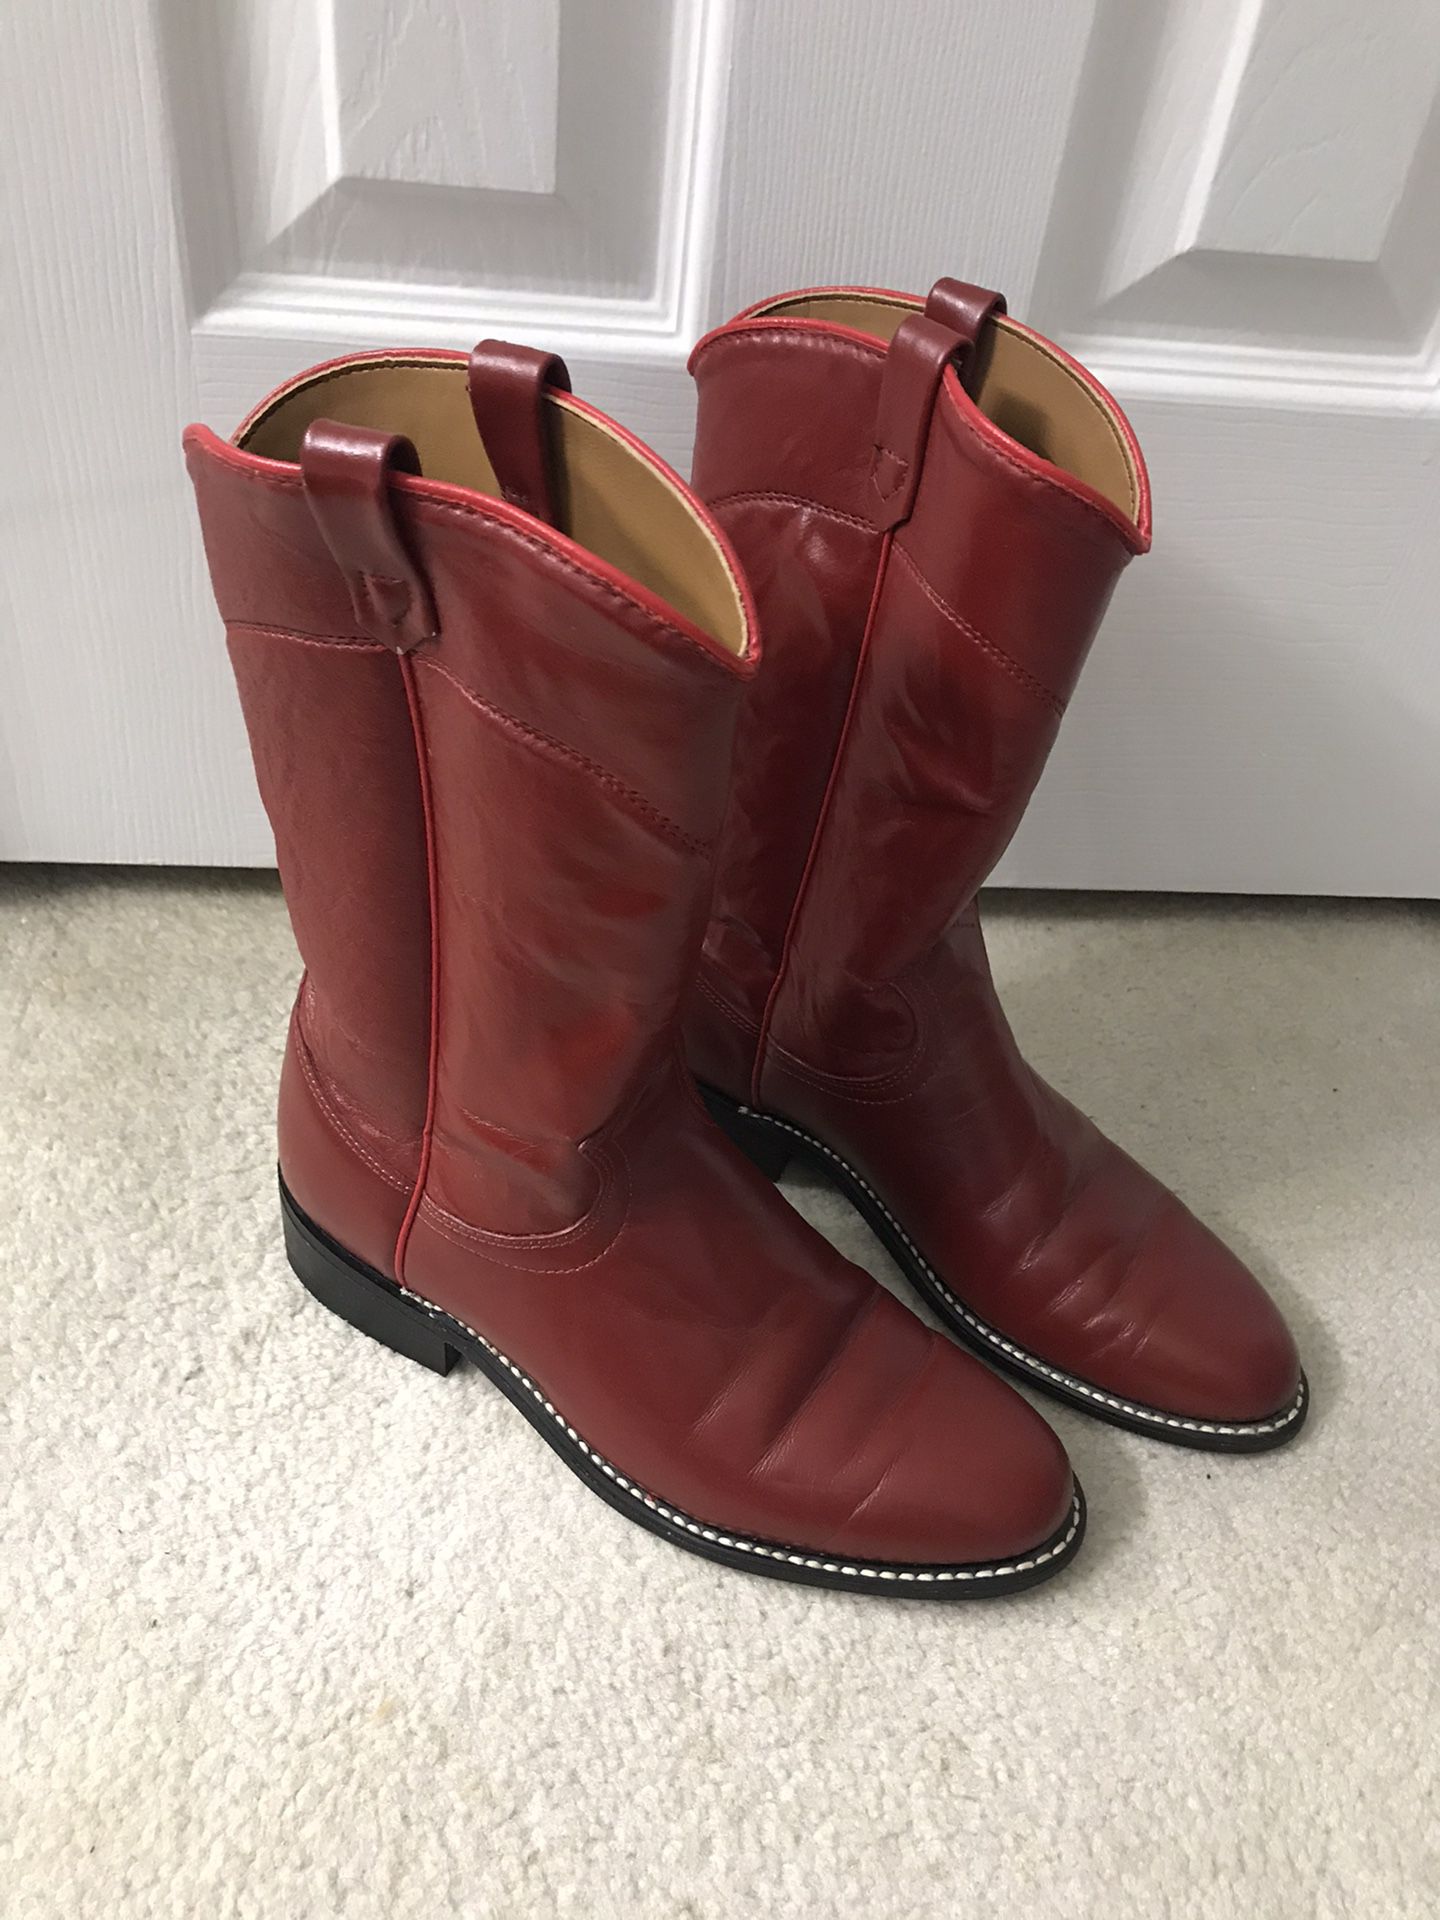 Ladies red cowboy boots size 7